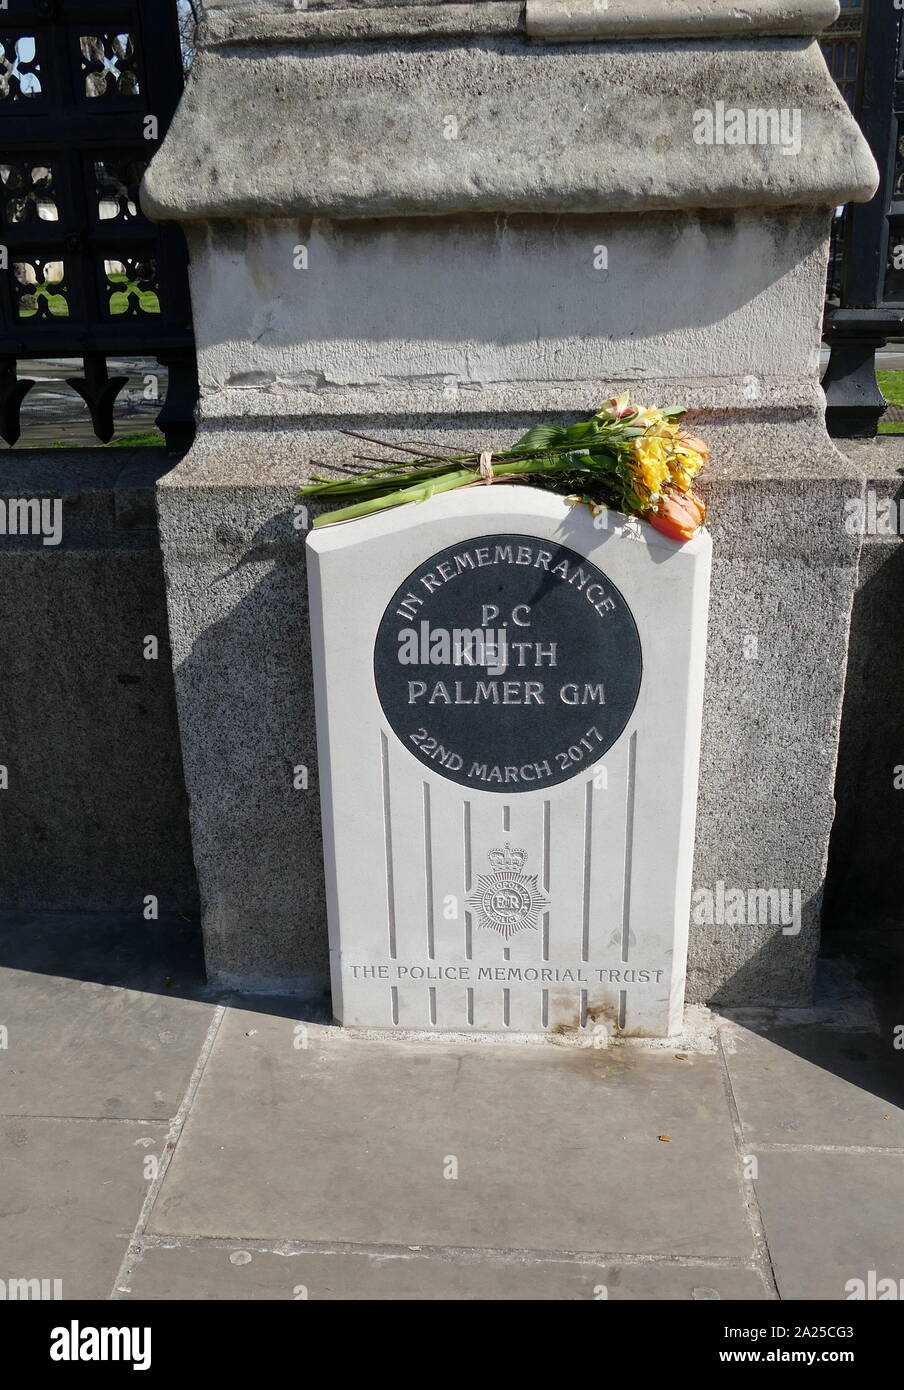 Memorial at the gates of Parliament dedicated to Keith Palmer, (1968 – 22 March 2017); British police officer who was posthumously awarded the George Medal, the second highest award for gallantry 'not in the face of the enemy'. Though unarmed, he stopped a knife-wielding terrorist from entering the Palace of Westminster during the 2017 Westminster attack; he died from wounds he received in this attack Stock Photo